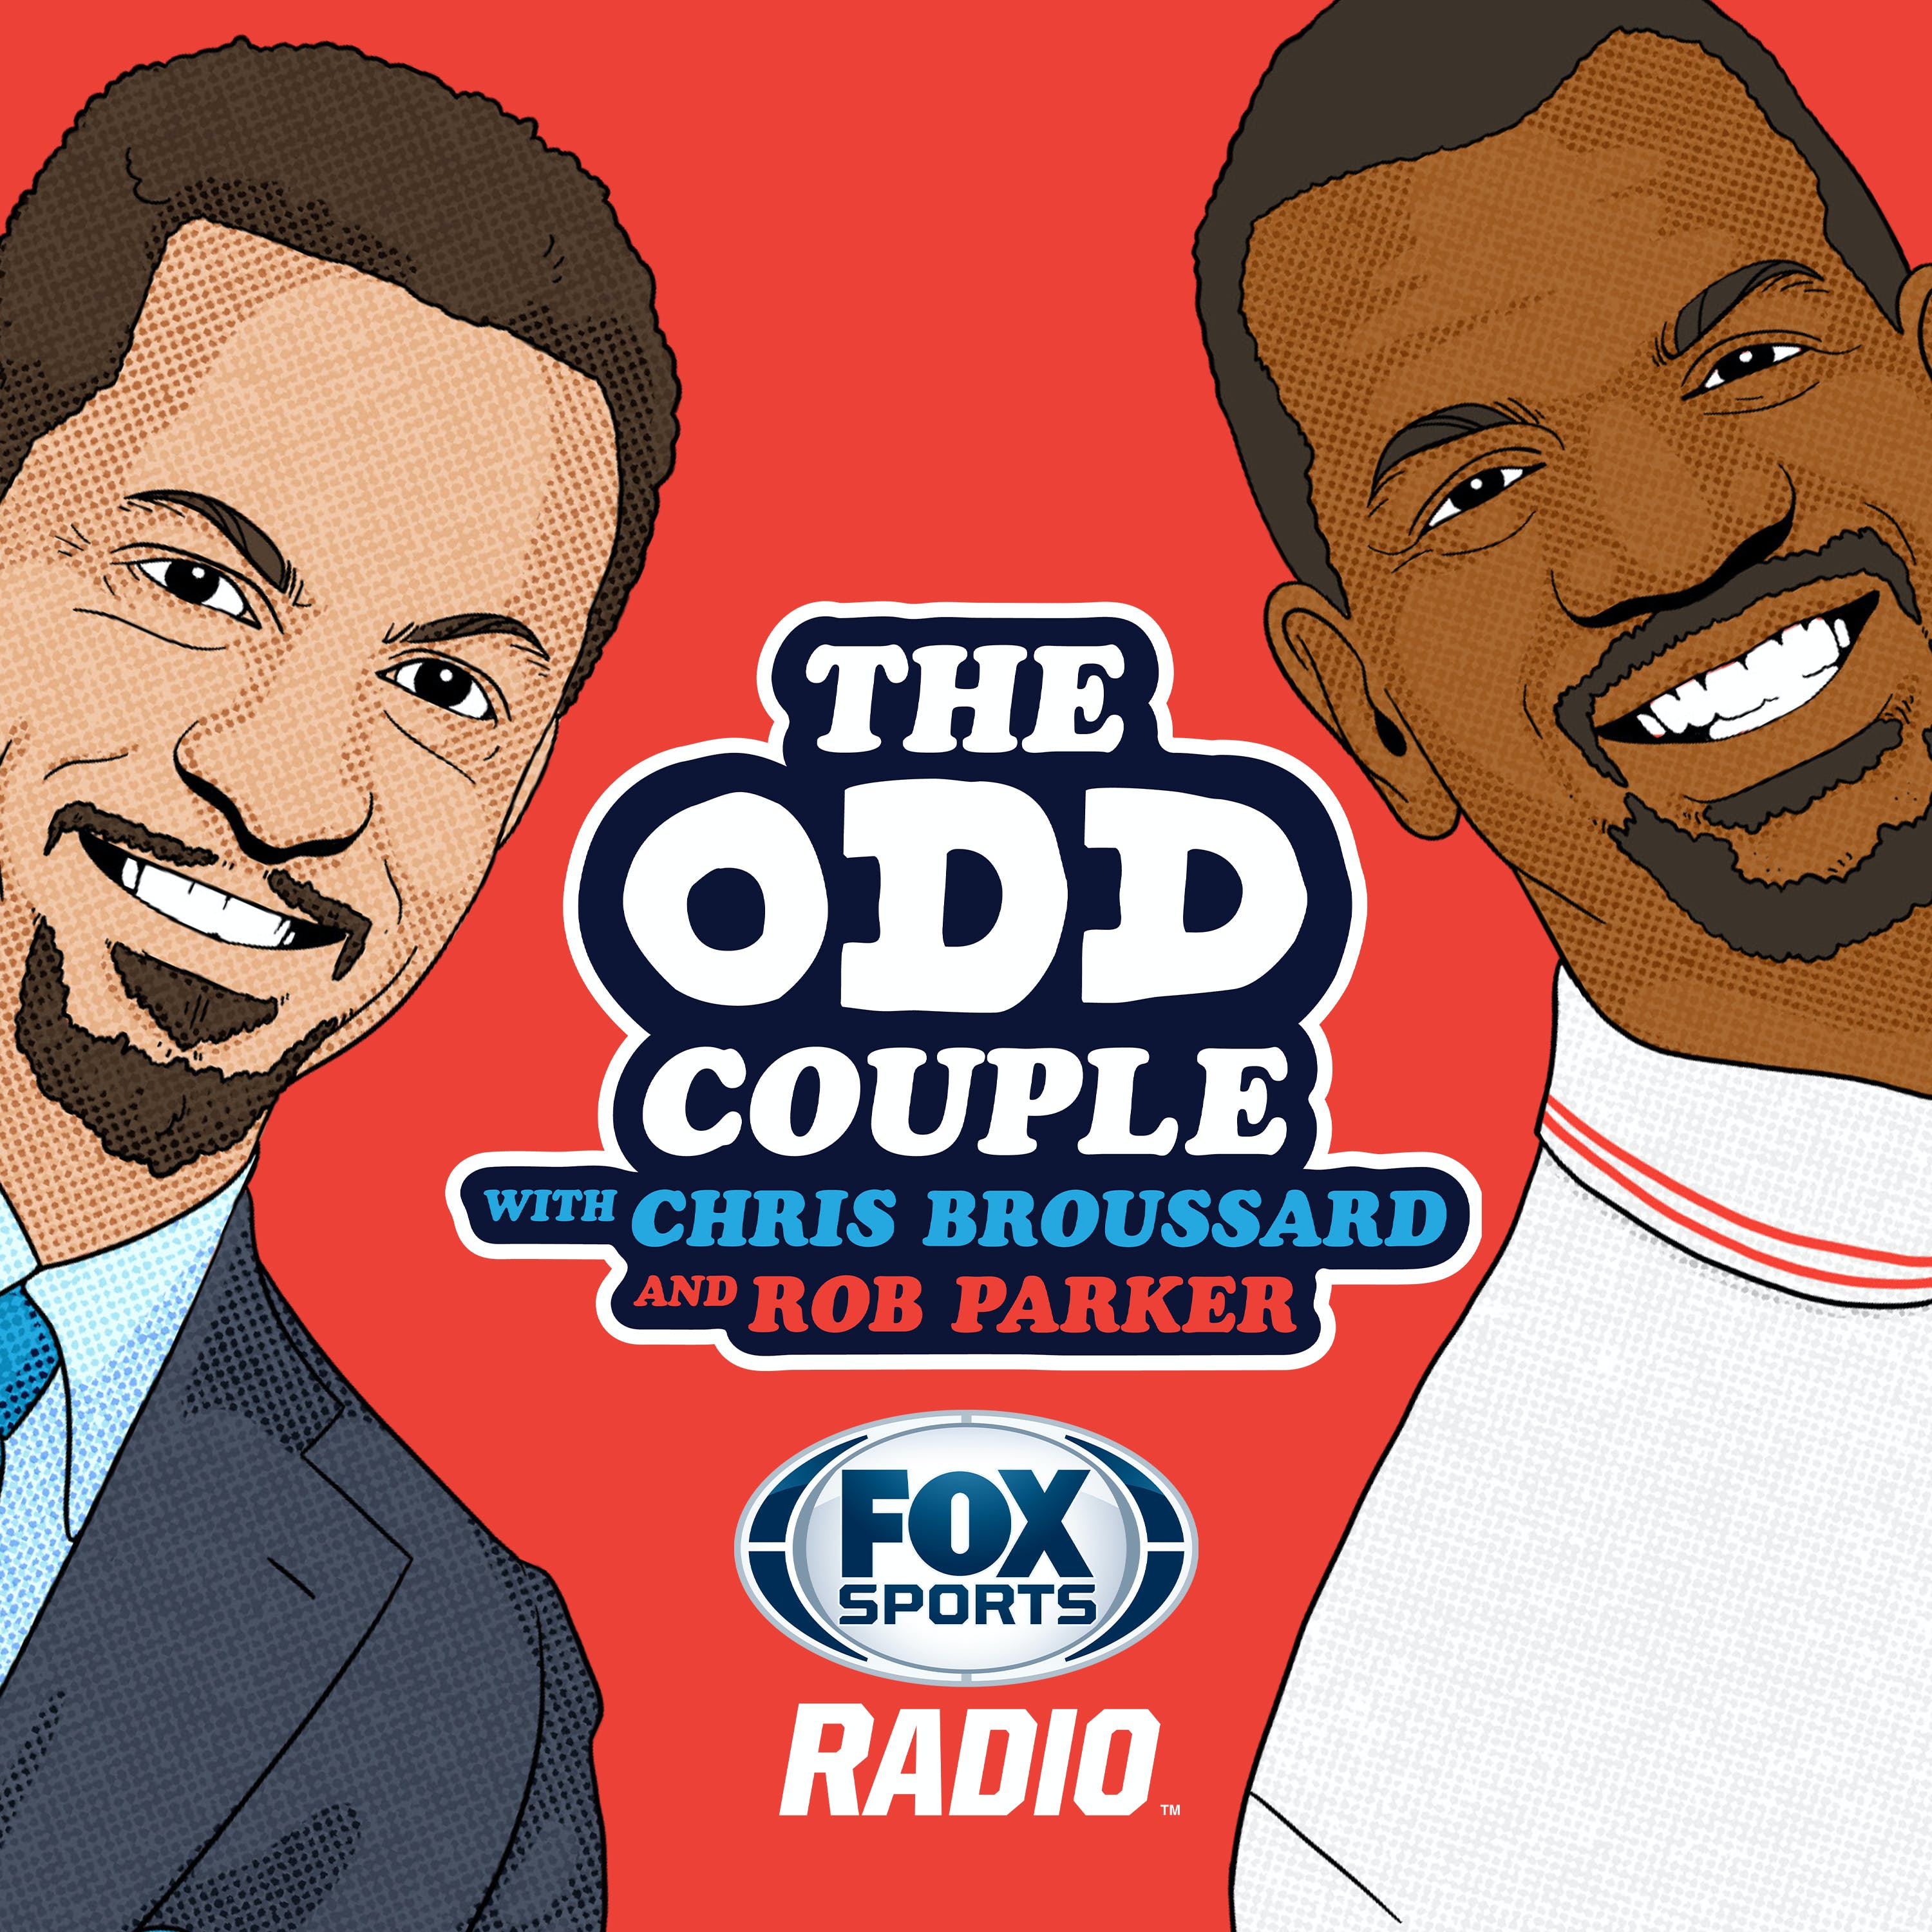 11/17/2021 - Best of The Odd Couple